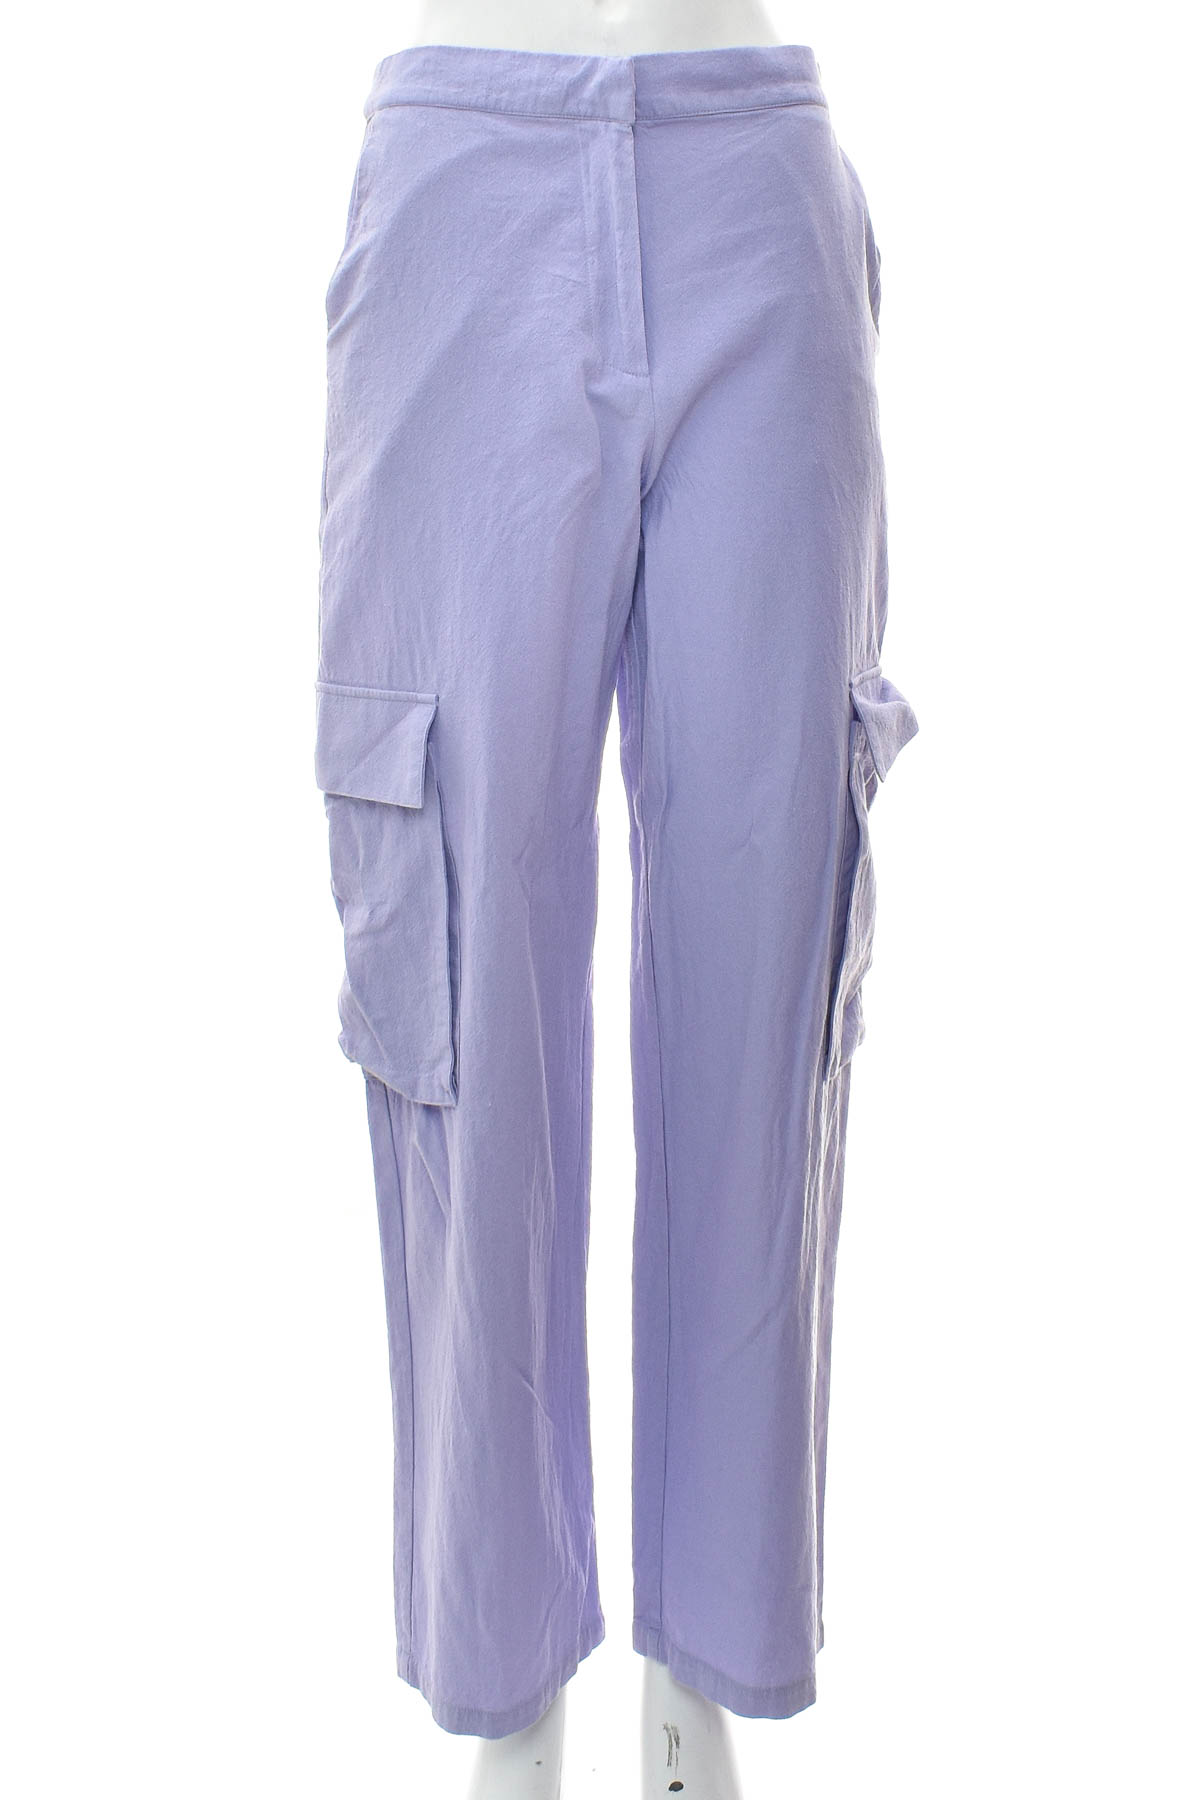 Women's trousers - EDITED - 0